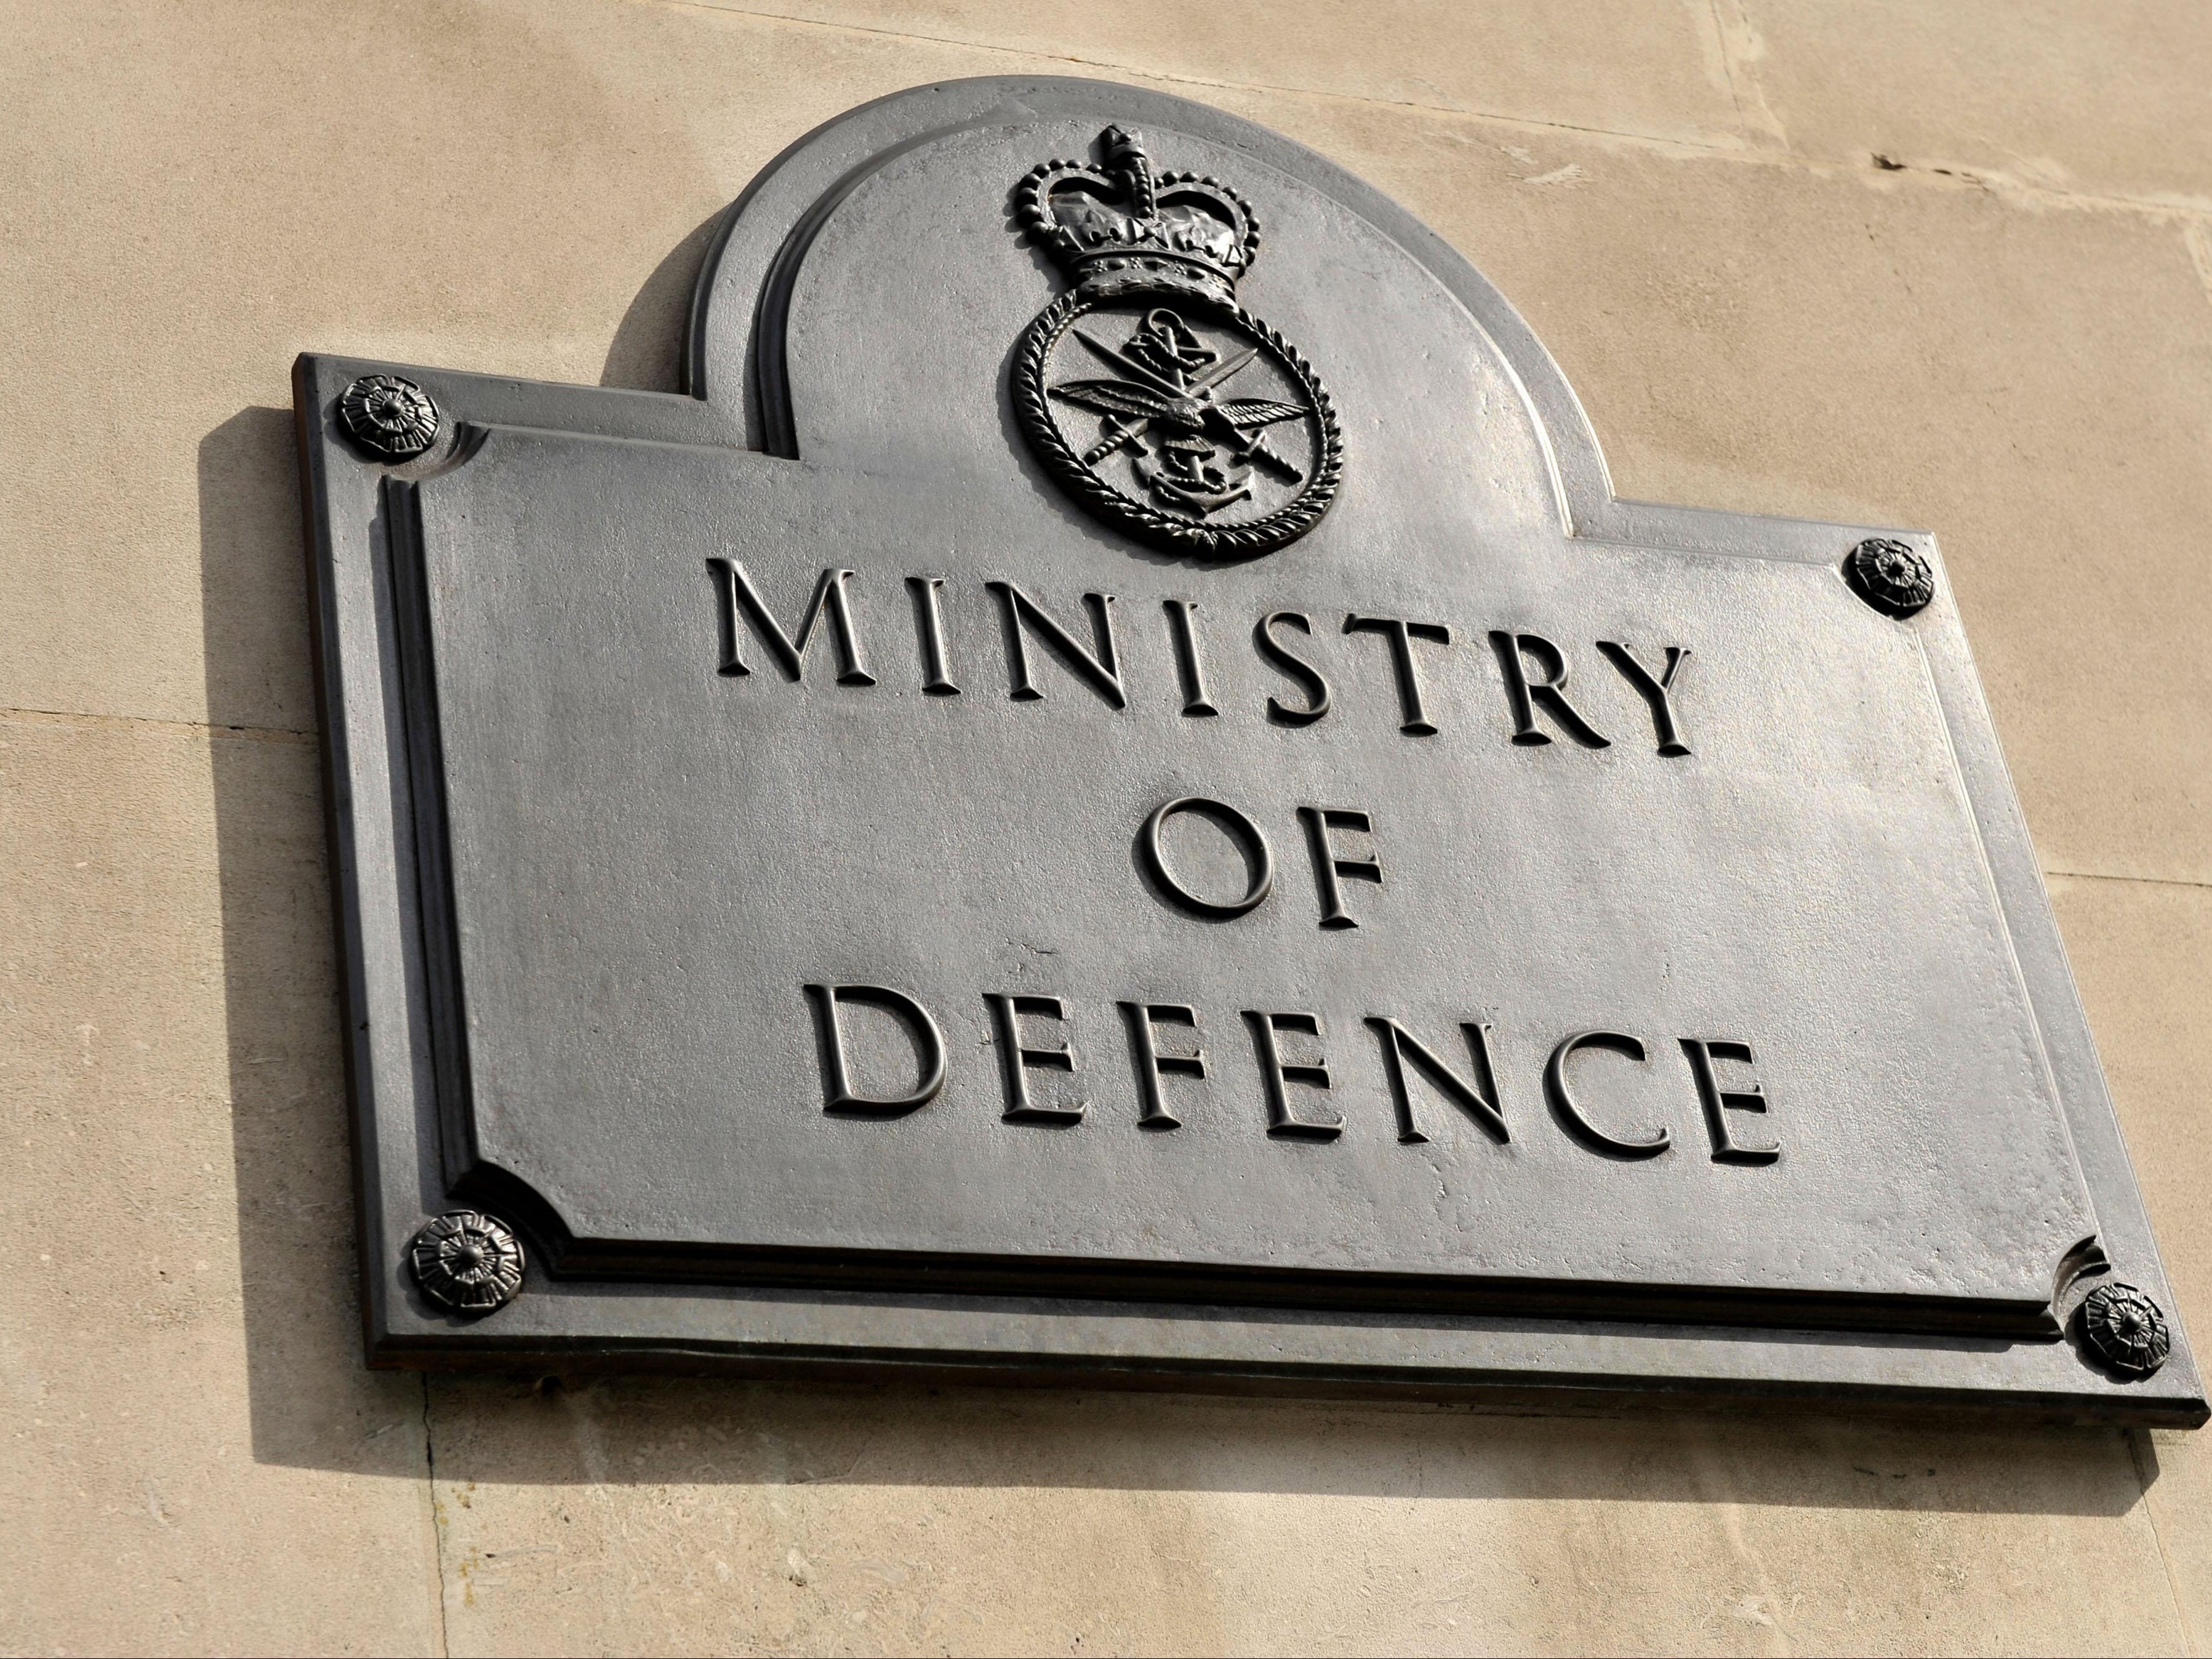 The security breach was discovered in March 2021 and the Defence Academy was forced to rebuild its network